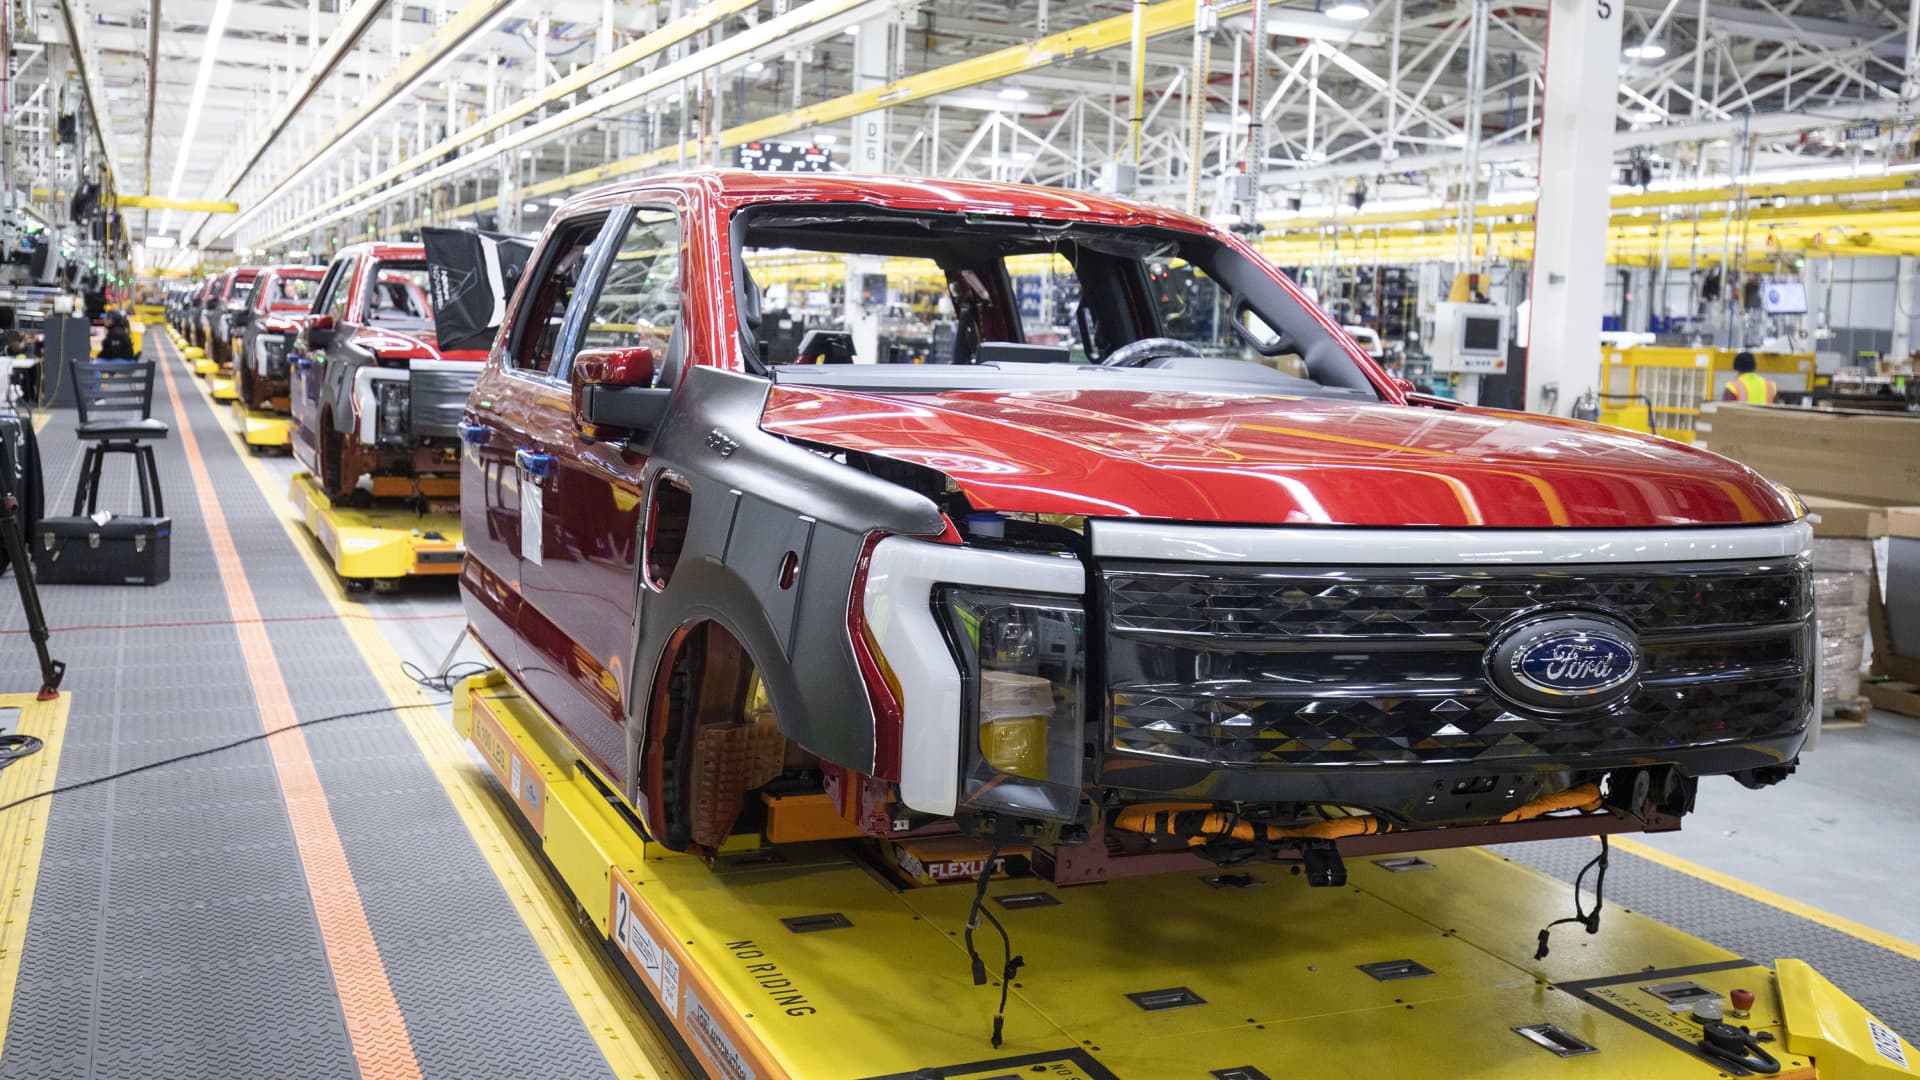 Ford F-150 Lightning pickup trucks sit on the production line at the Ford Rouge Electric Vehicle Center on April 26, 2022 in Dearborn, Michigan.